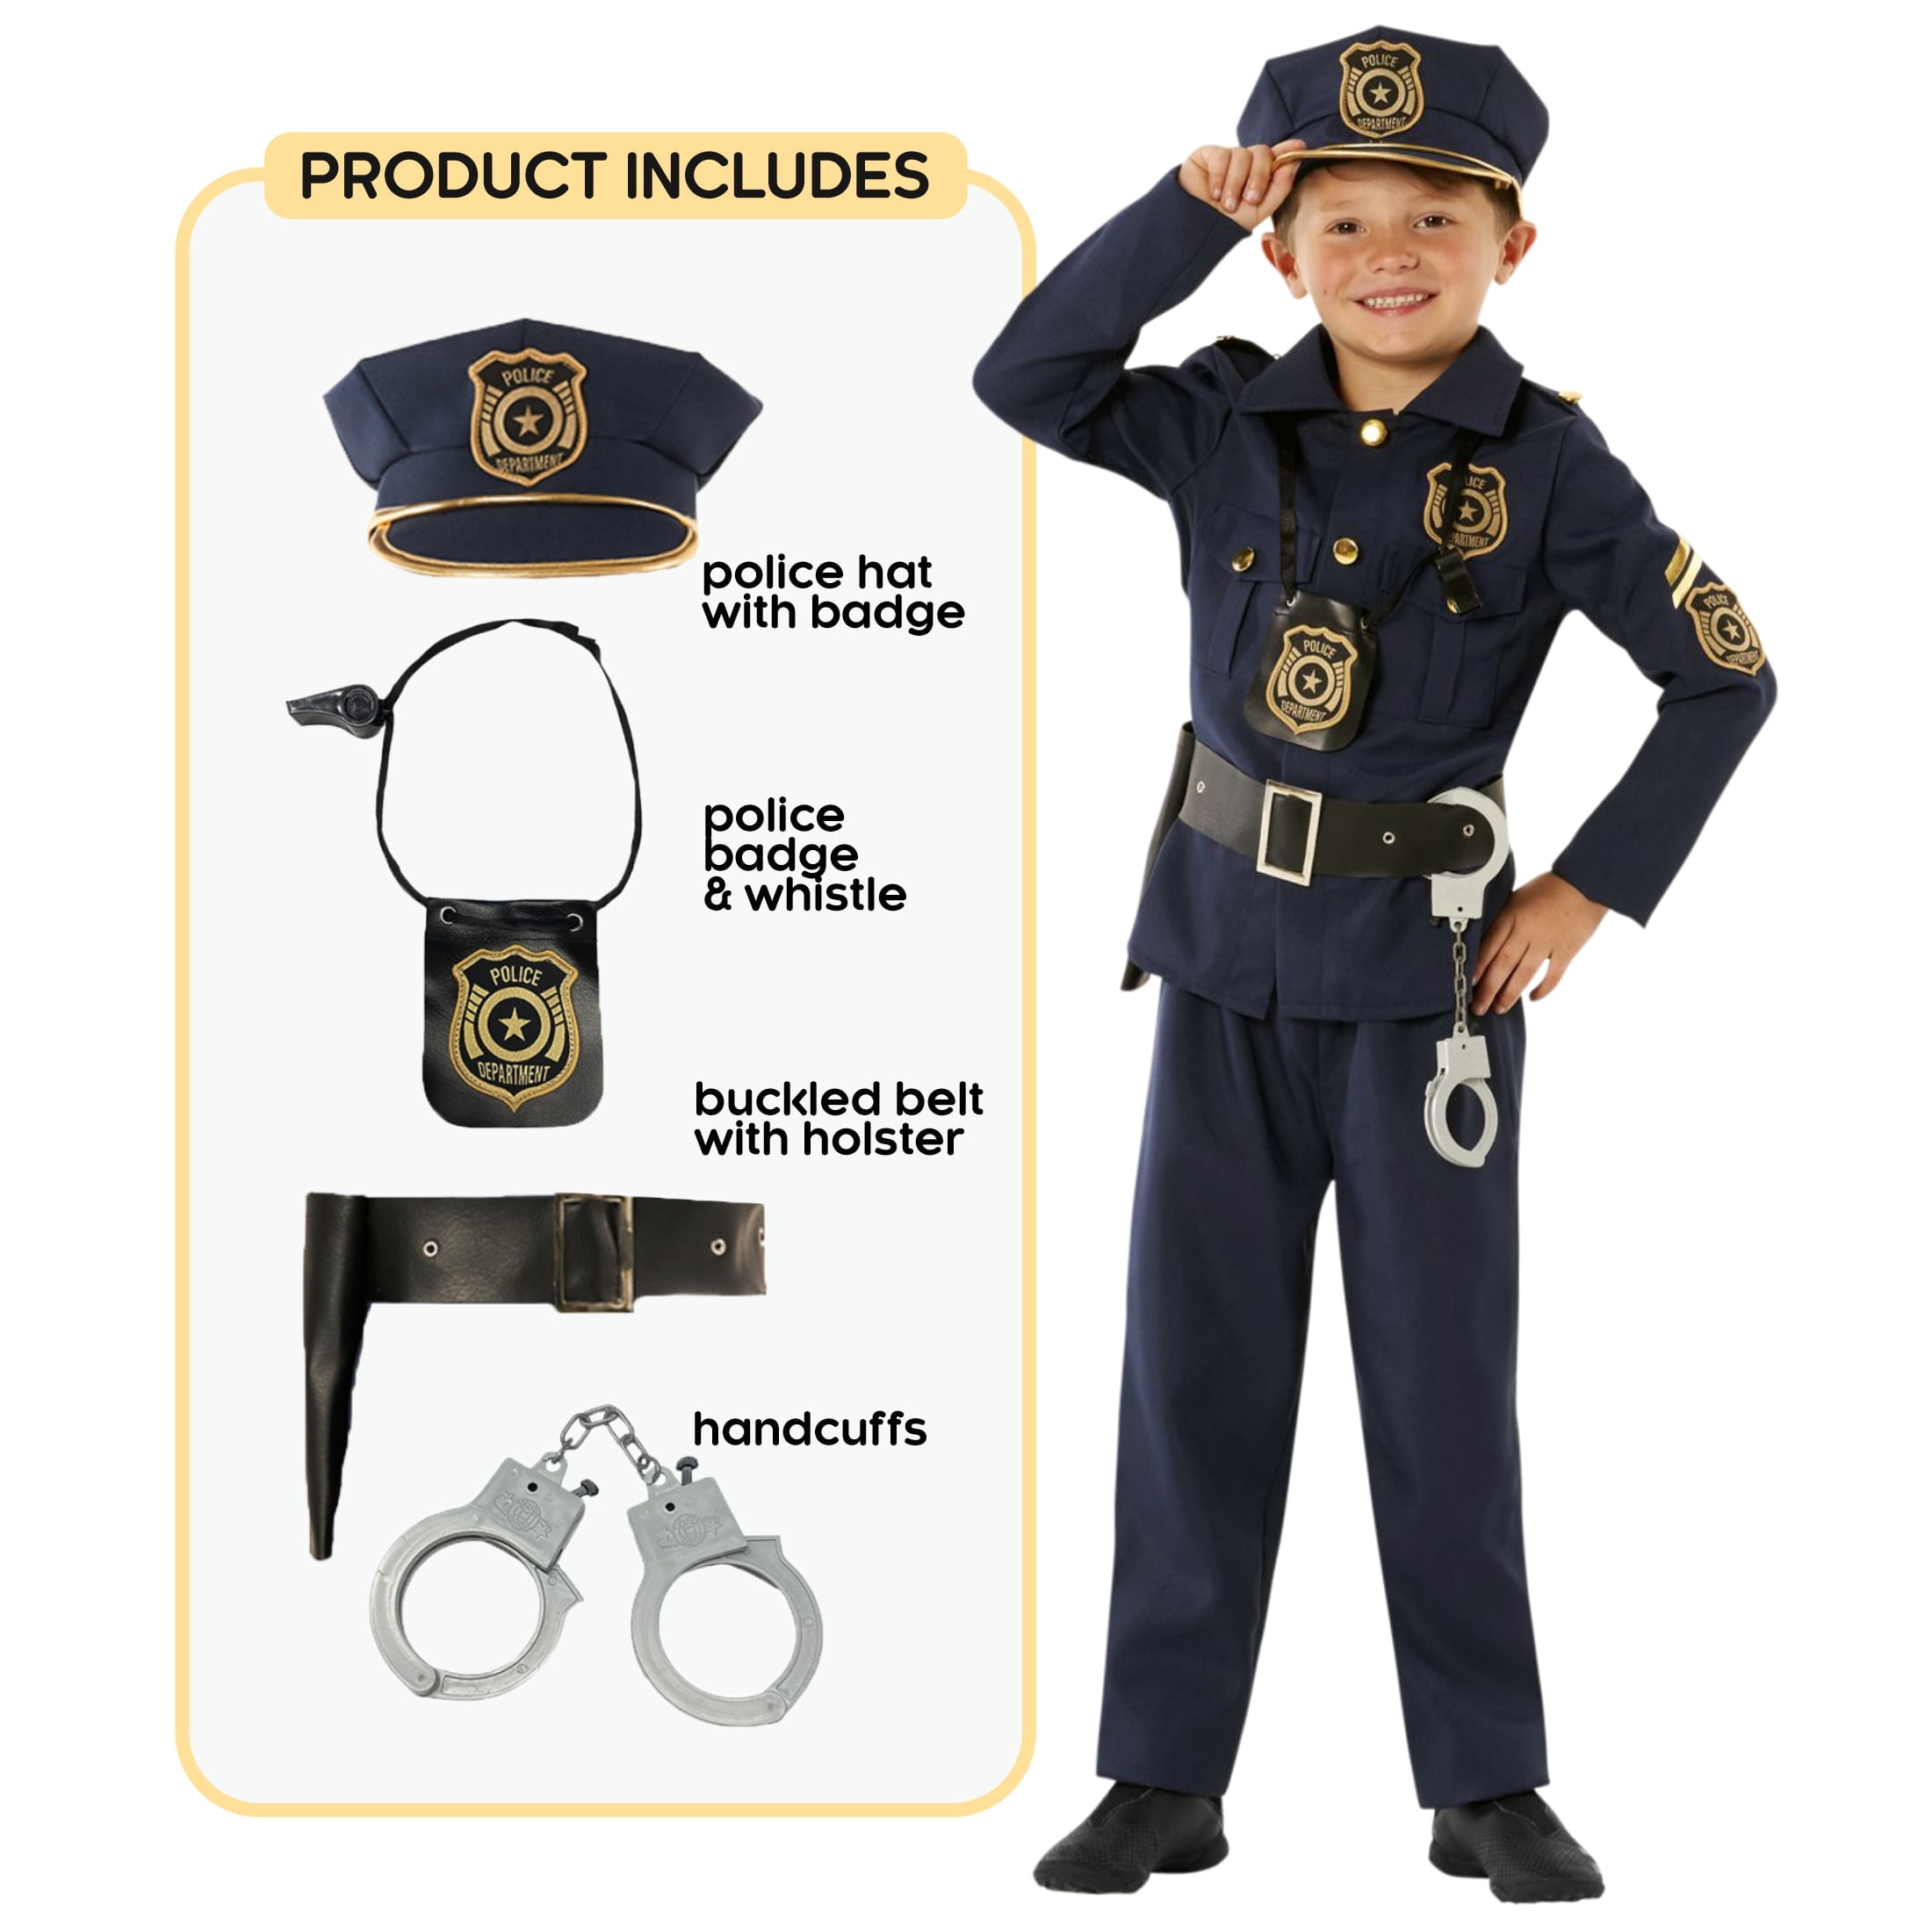 SWAT Officer Costume for Kids: This SWAT officier costume for kids includes  an all-in-one suit, vest, …